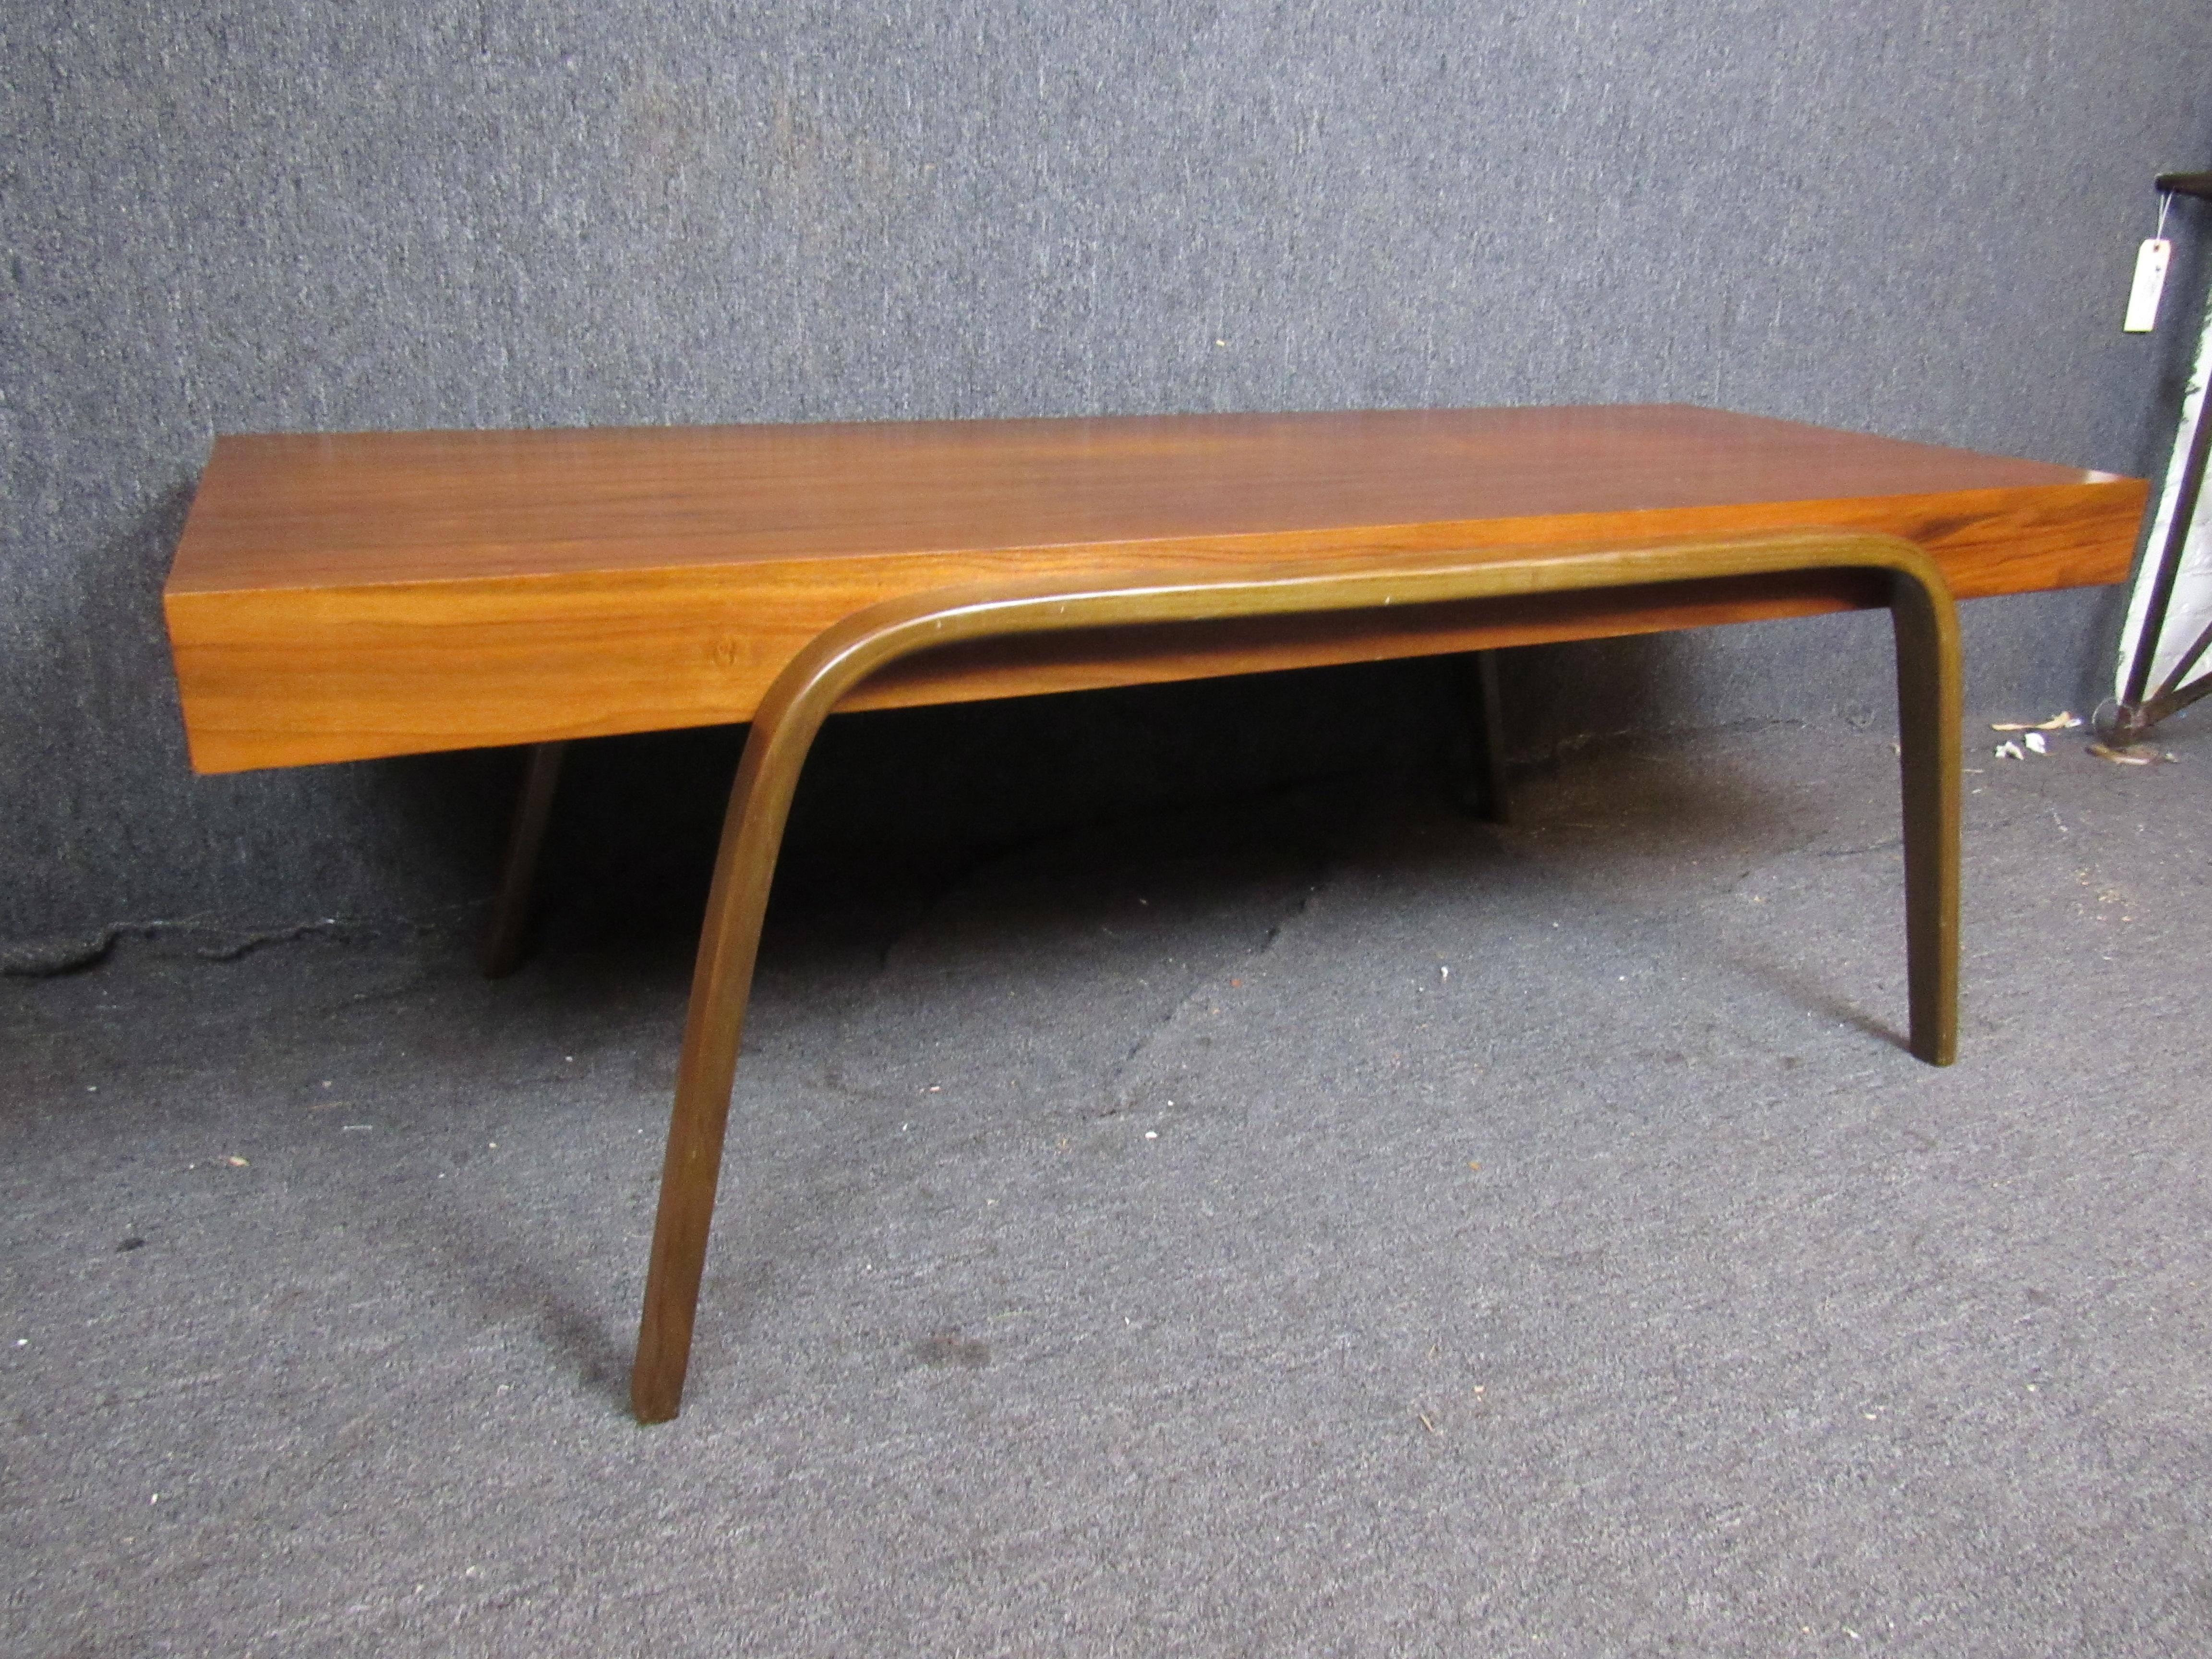 Wonderful walnut coffee table with unique bentwood legs! Authentic mid-century modern design provides timeless functionality and aesthetics. 
Please confirm item pickup location (New York or New Jersey) with dealer.